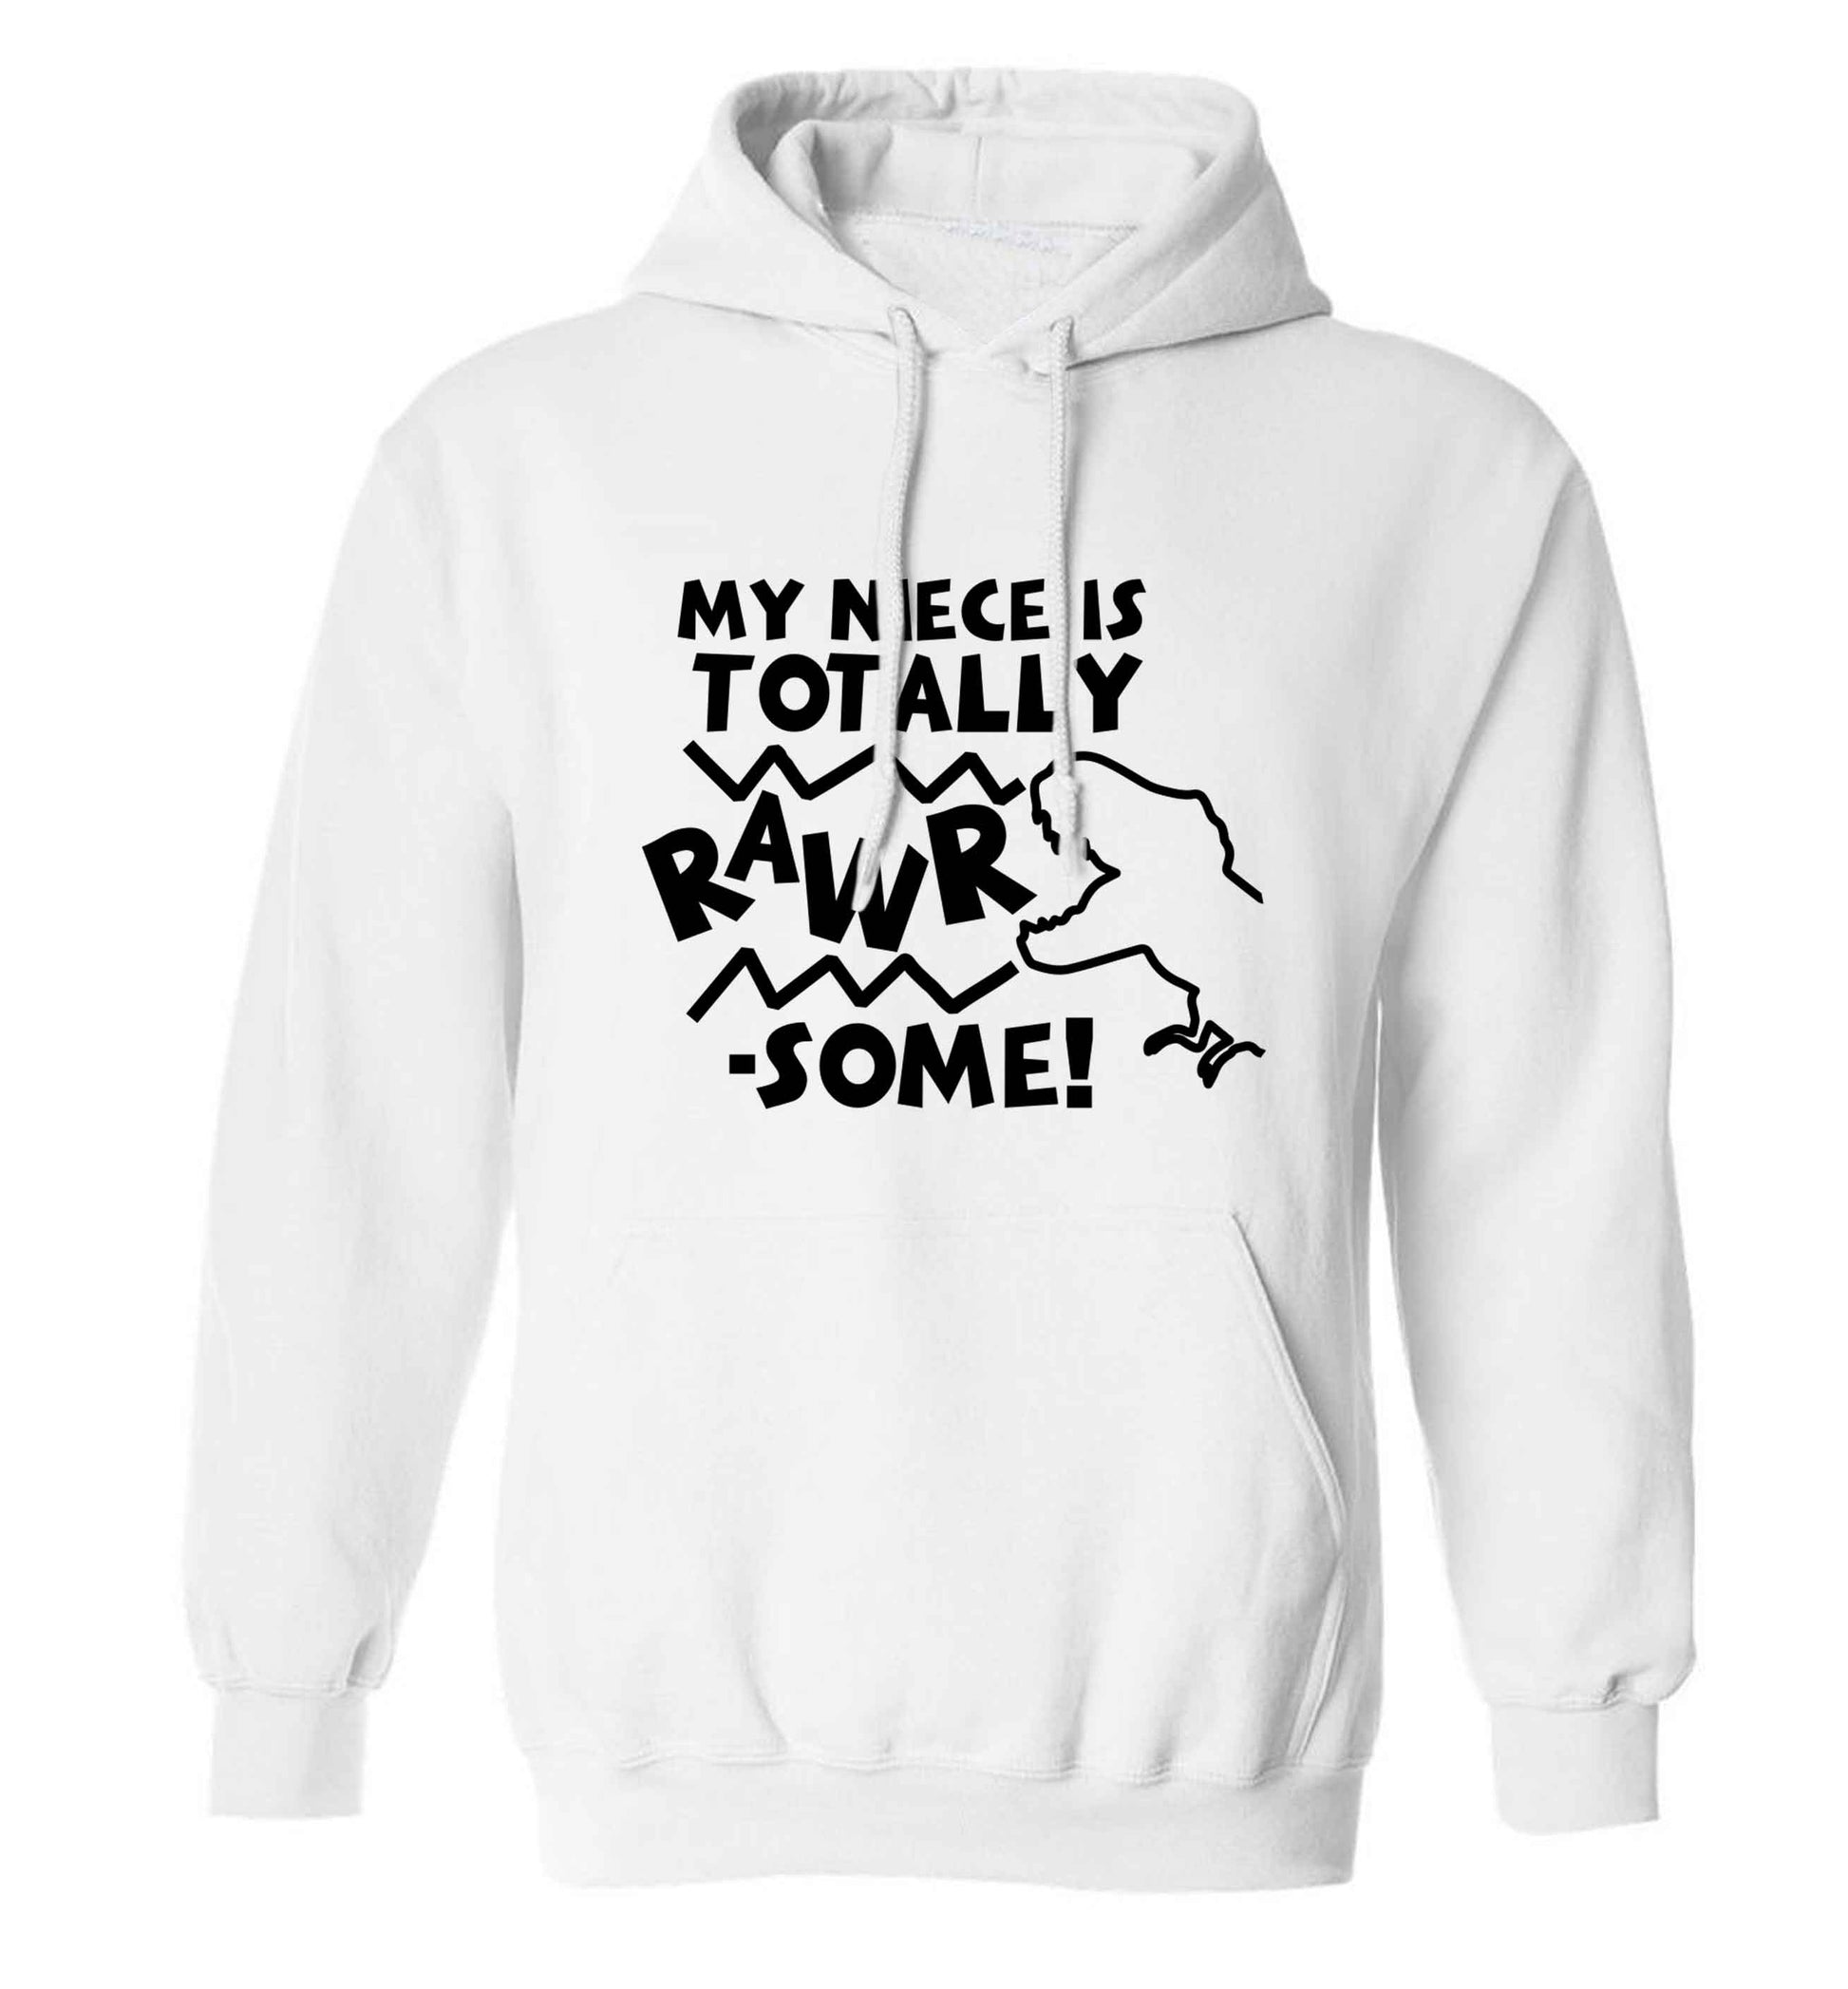 My niece is totally rawrsome adults unisex white hoodie 2XL